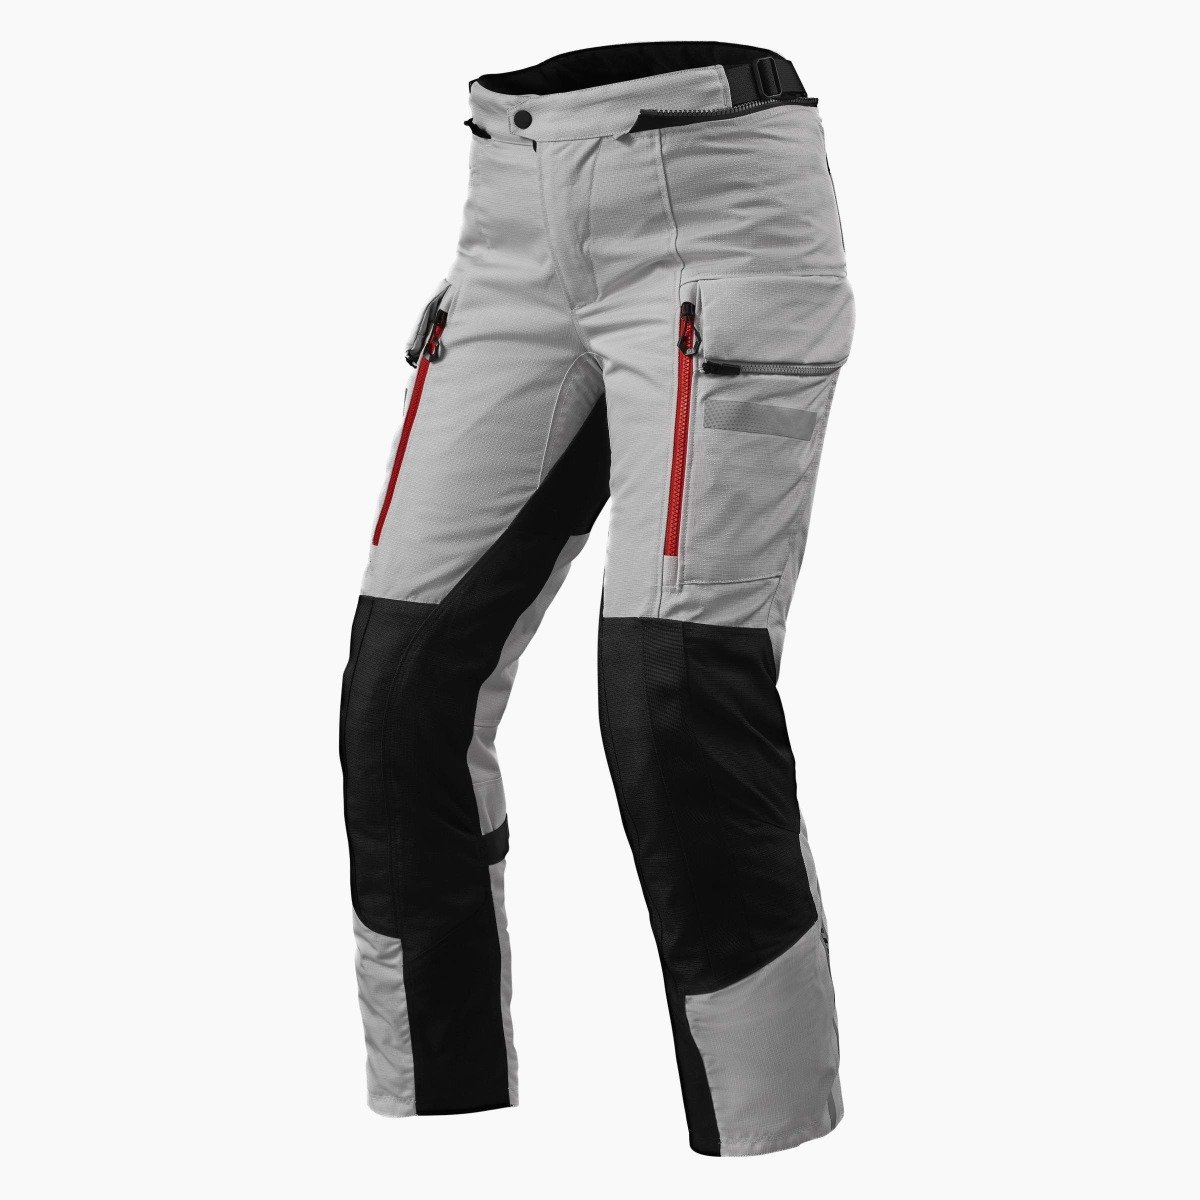 Image of REV'IT! Sand 4 H2O Ladies Short Silver Black Motorcycle Pants Size 38 ID 8700001316163